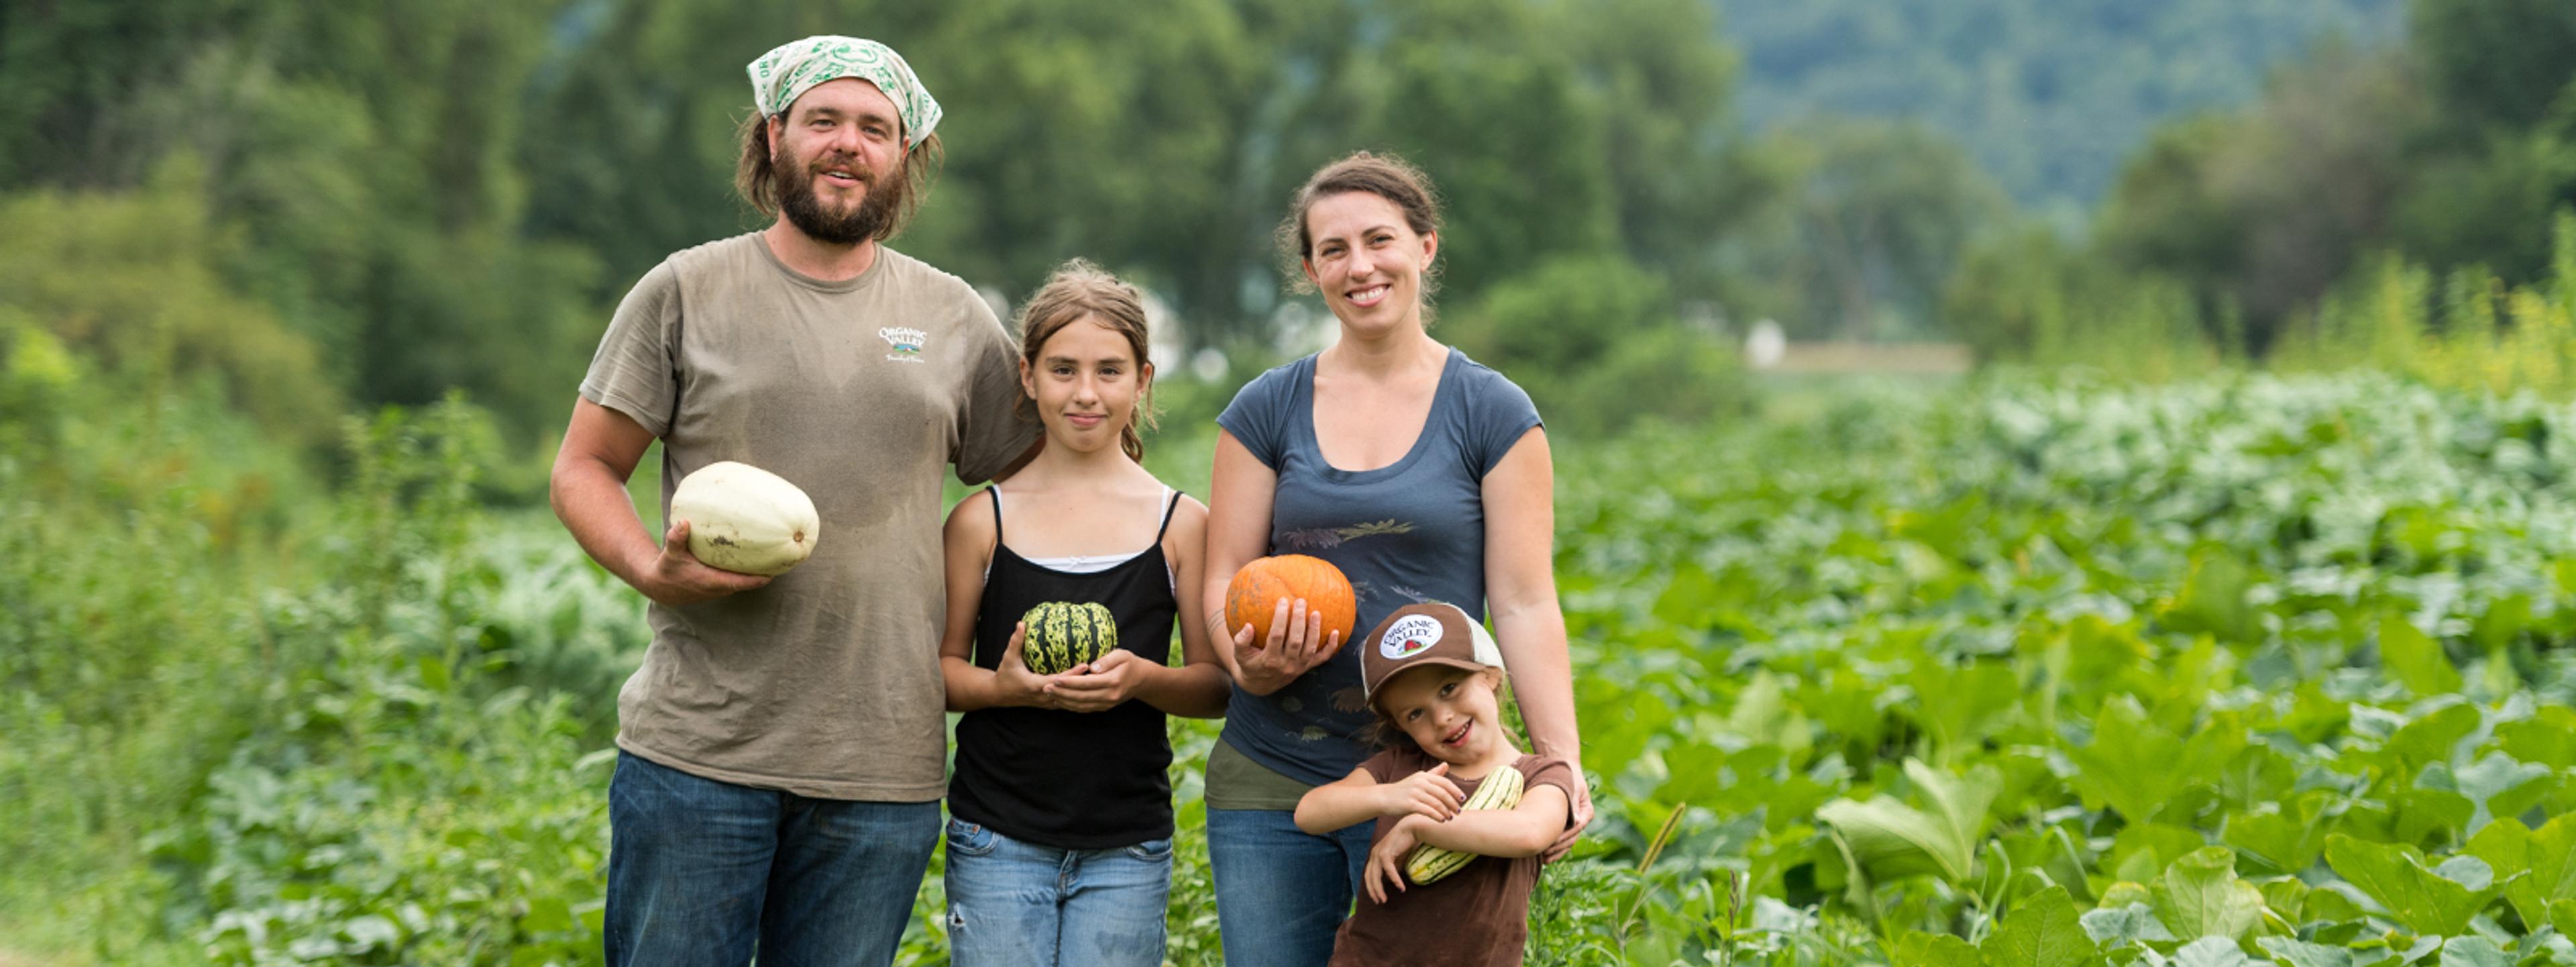 The Trussoni family on their Organic Valley produce farm in Wisconsin